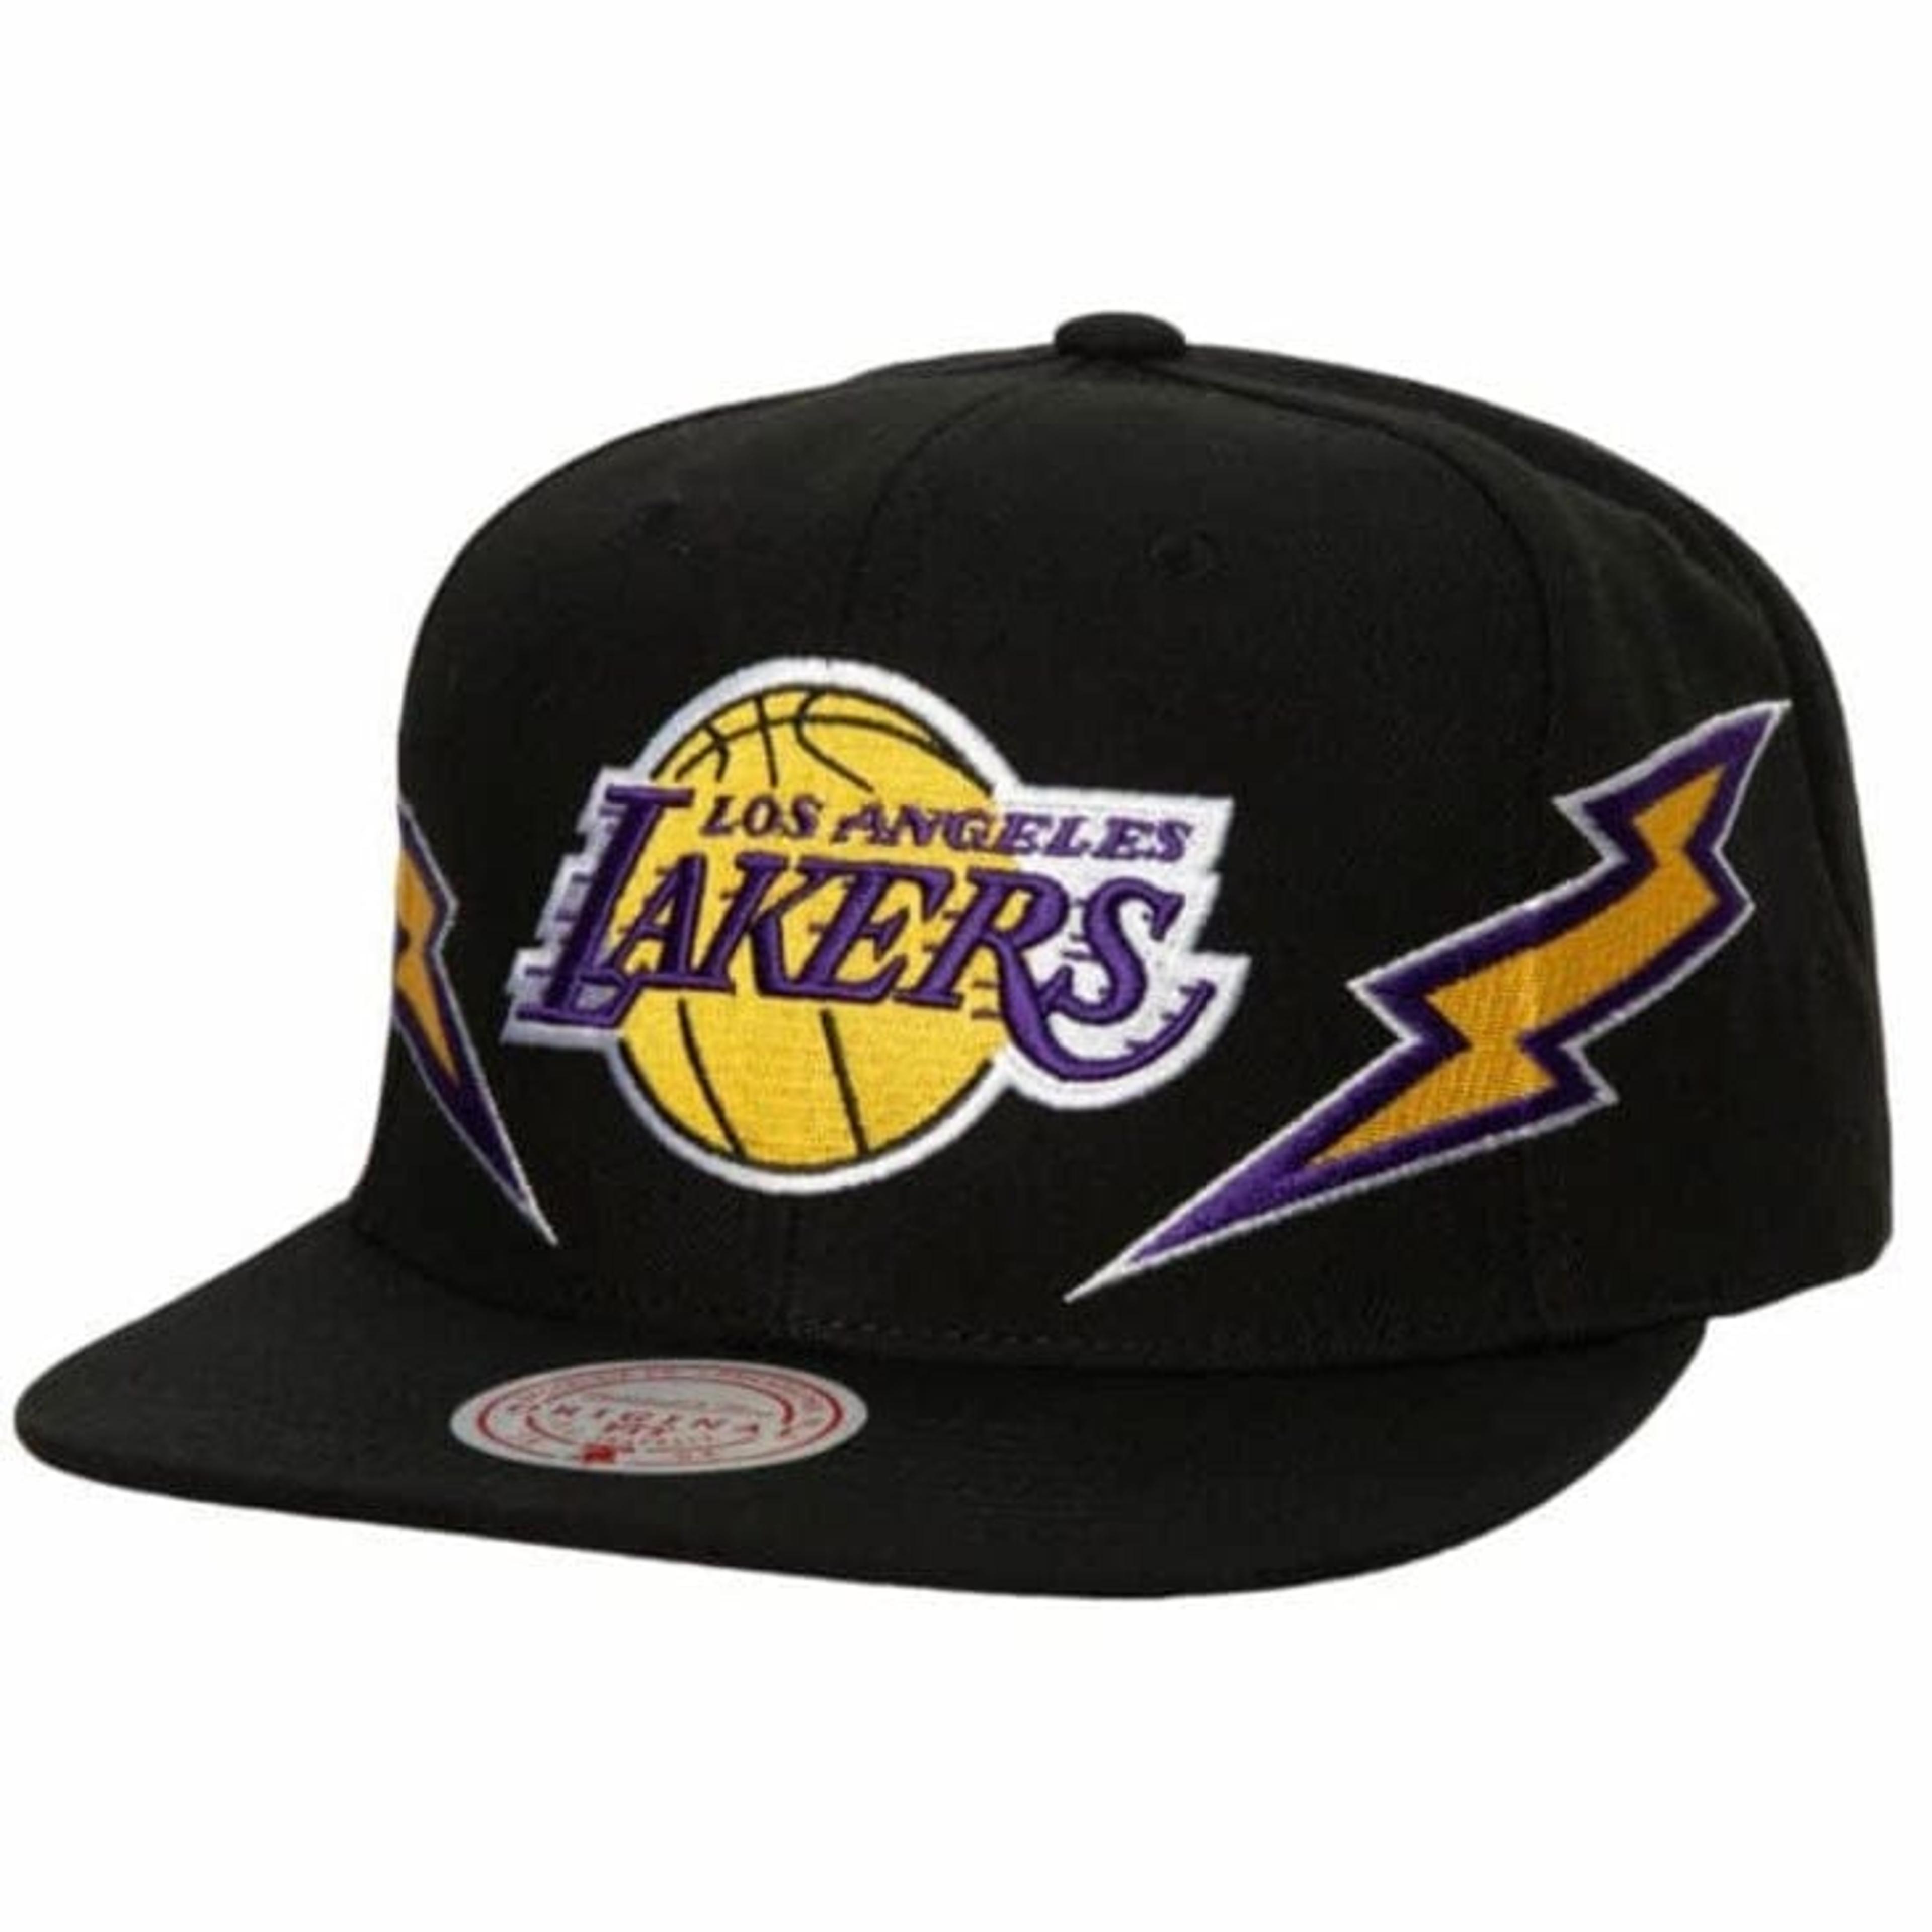 Mitchell & Ness NBA Los Angeles Lakers Double Trouble Snapback (